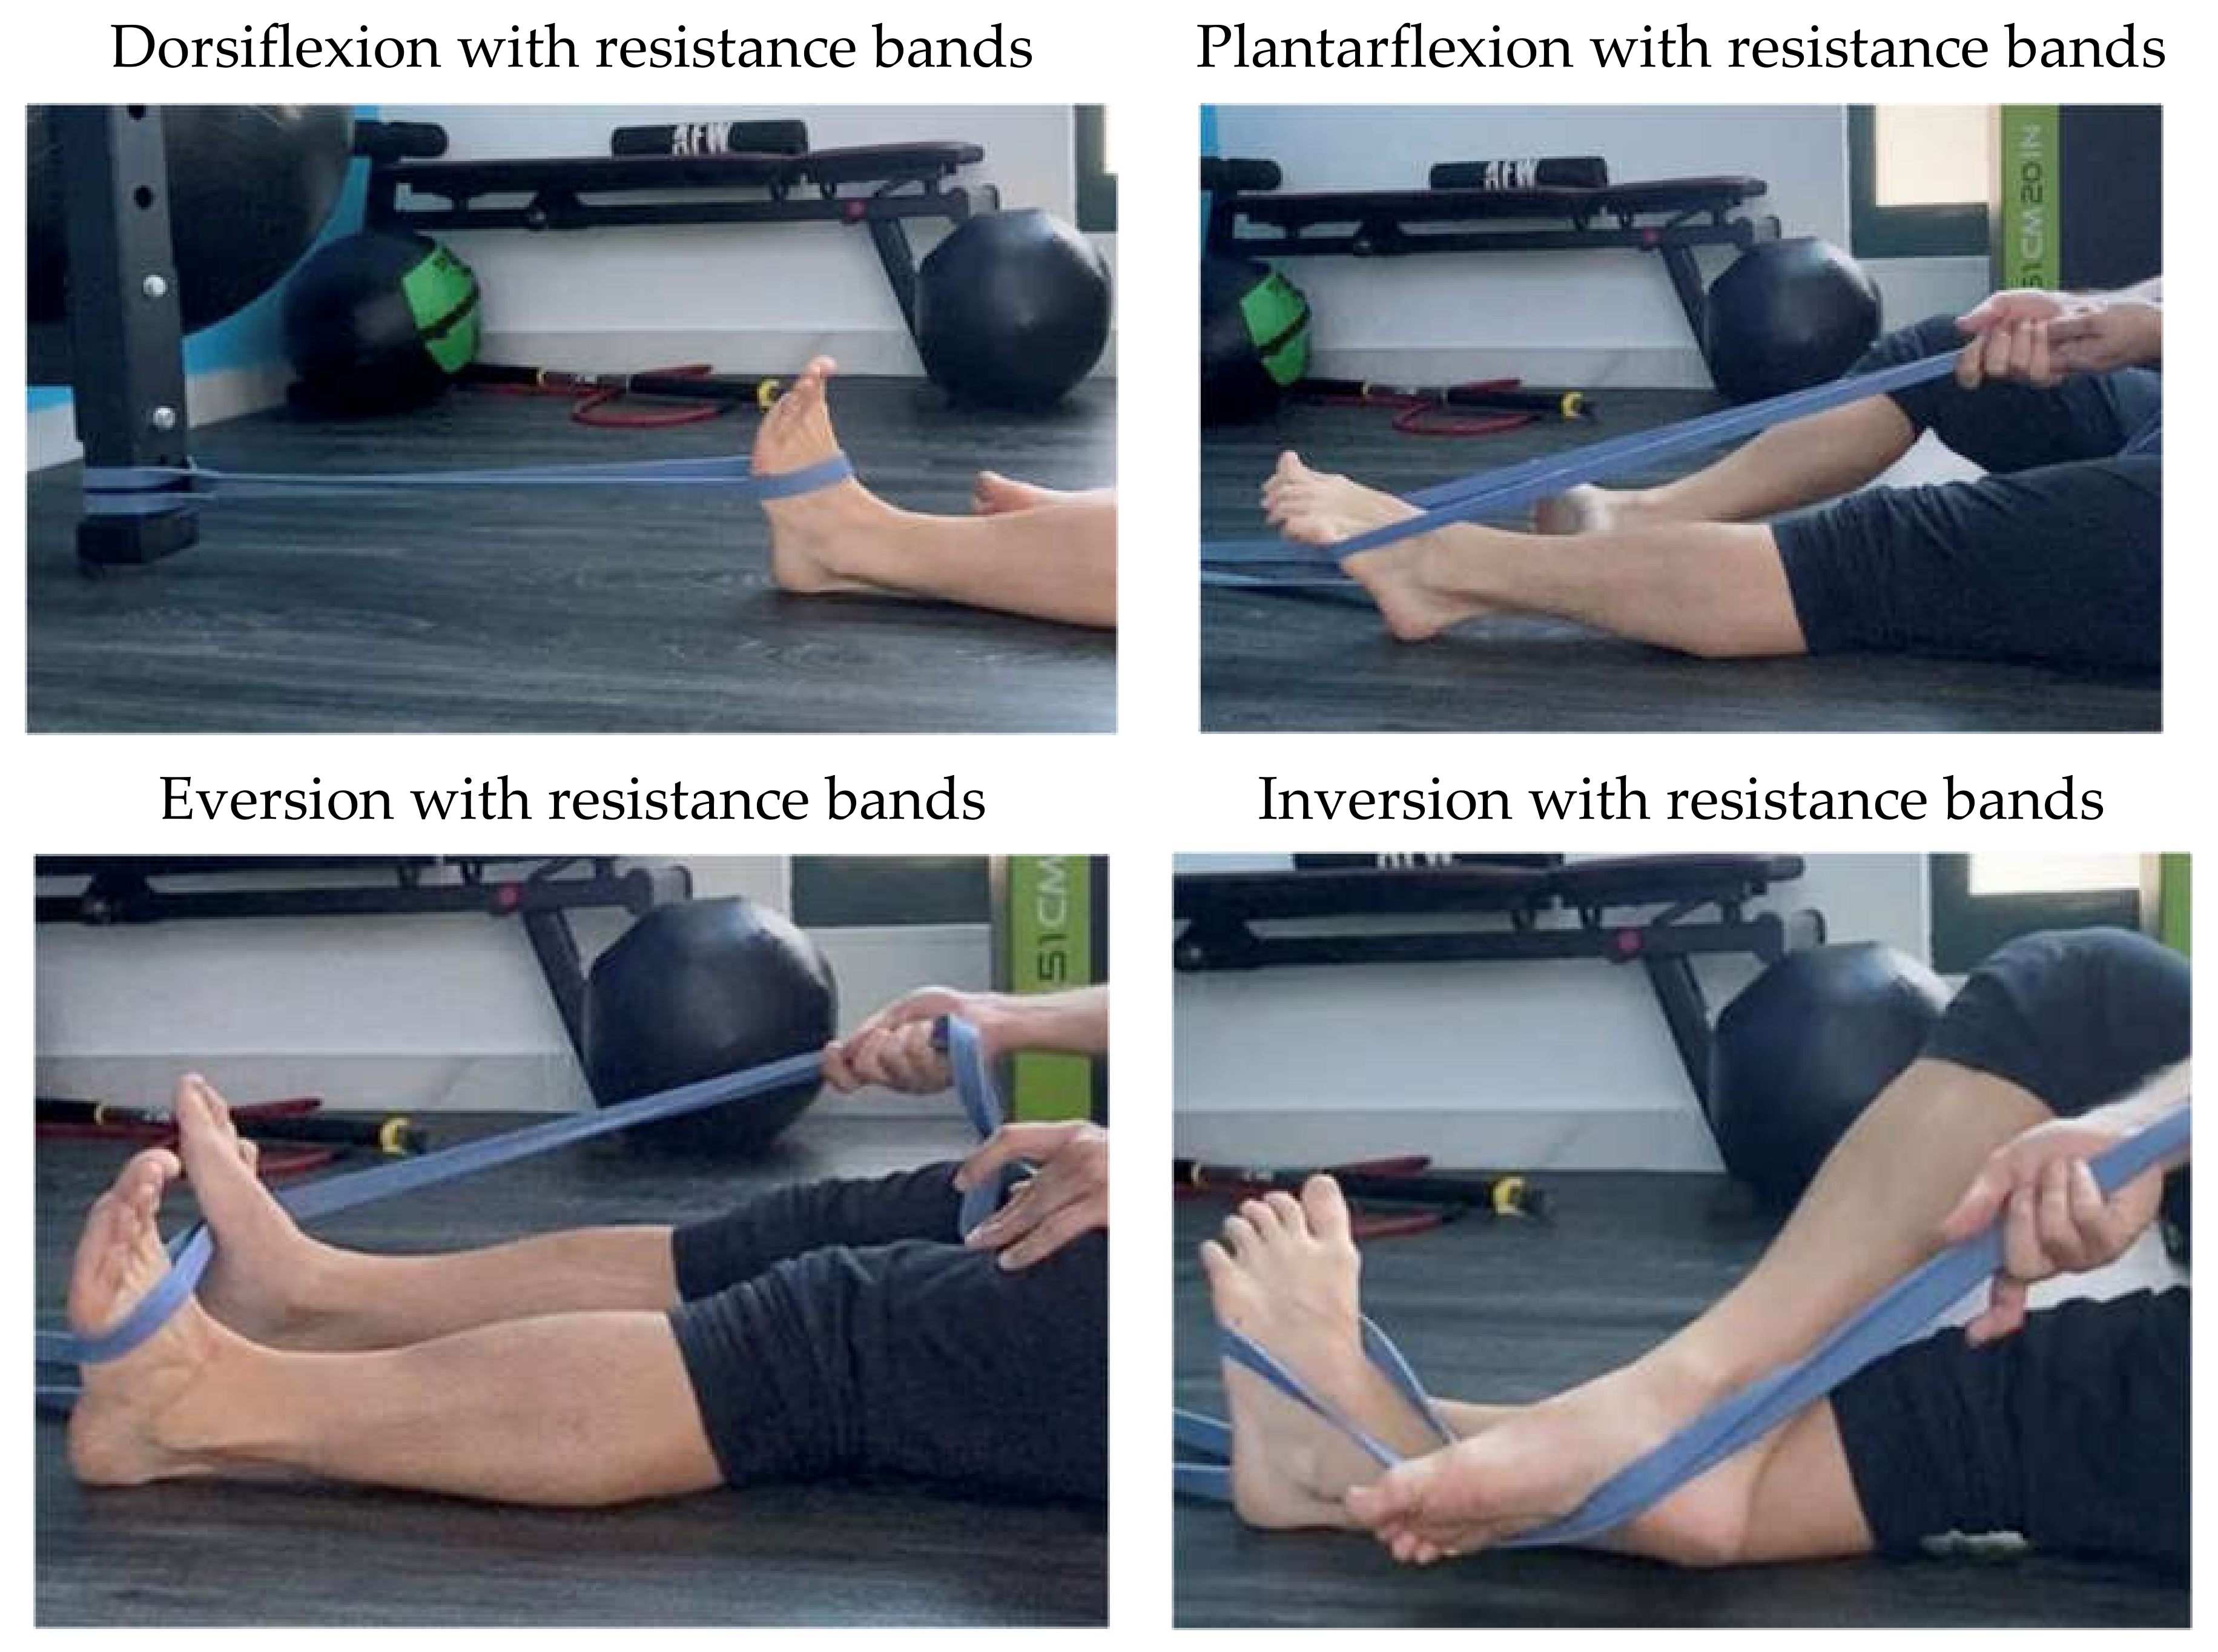 Serial Within-Session Improvements in Ankle Dorsiflexion During Clinical  Interventions Including Mobilization-With-Movement and A Novel Manipulation  Intervention – A Case Series